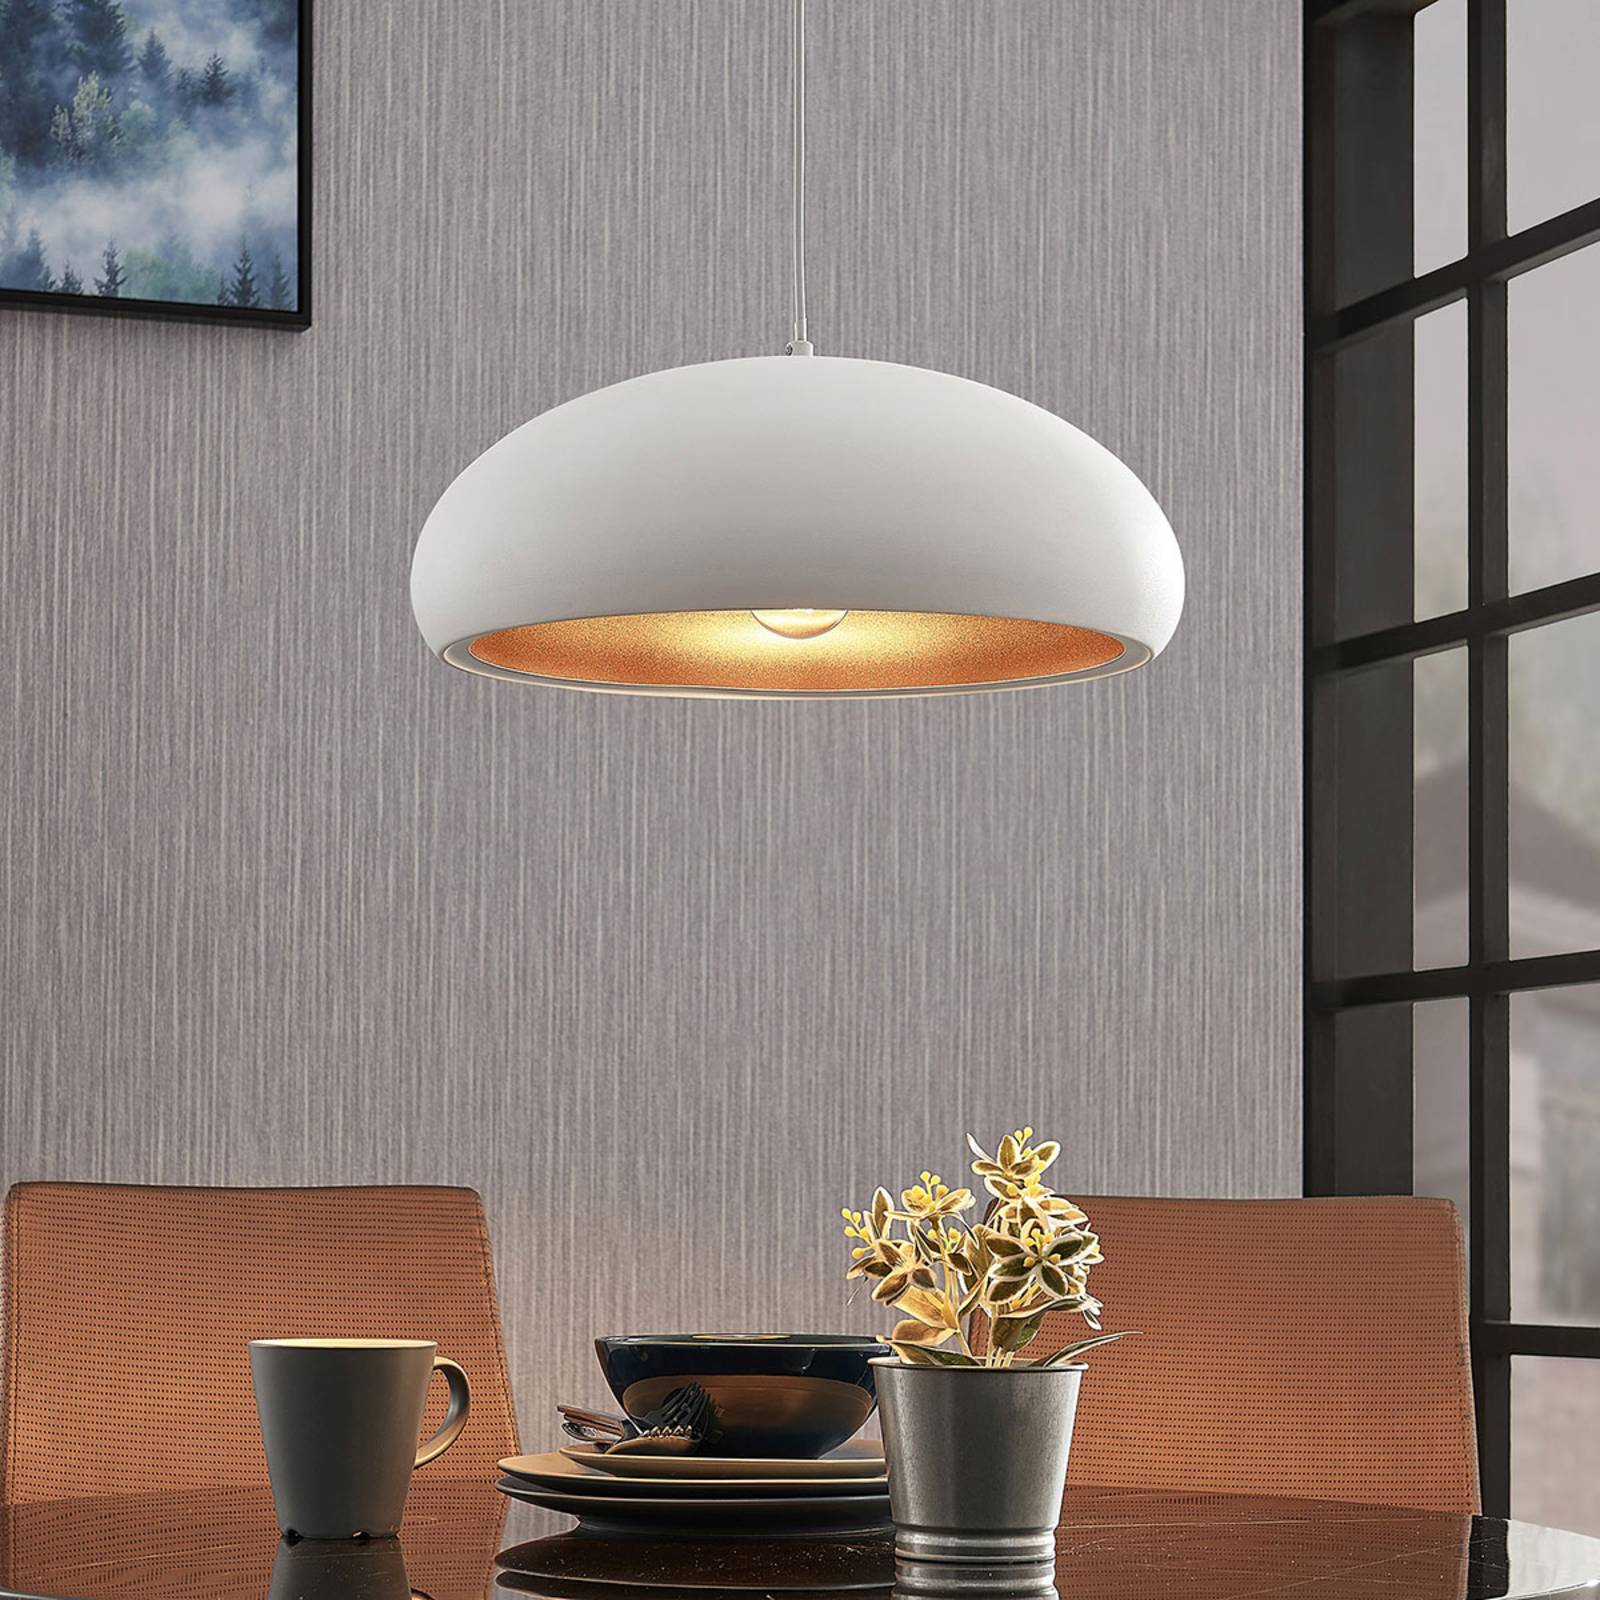 Photos - Chandelier / Lamp Lindby Gerwina metal pendant lamp, white and gold 